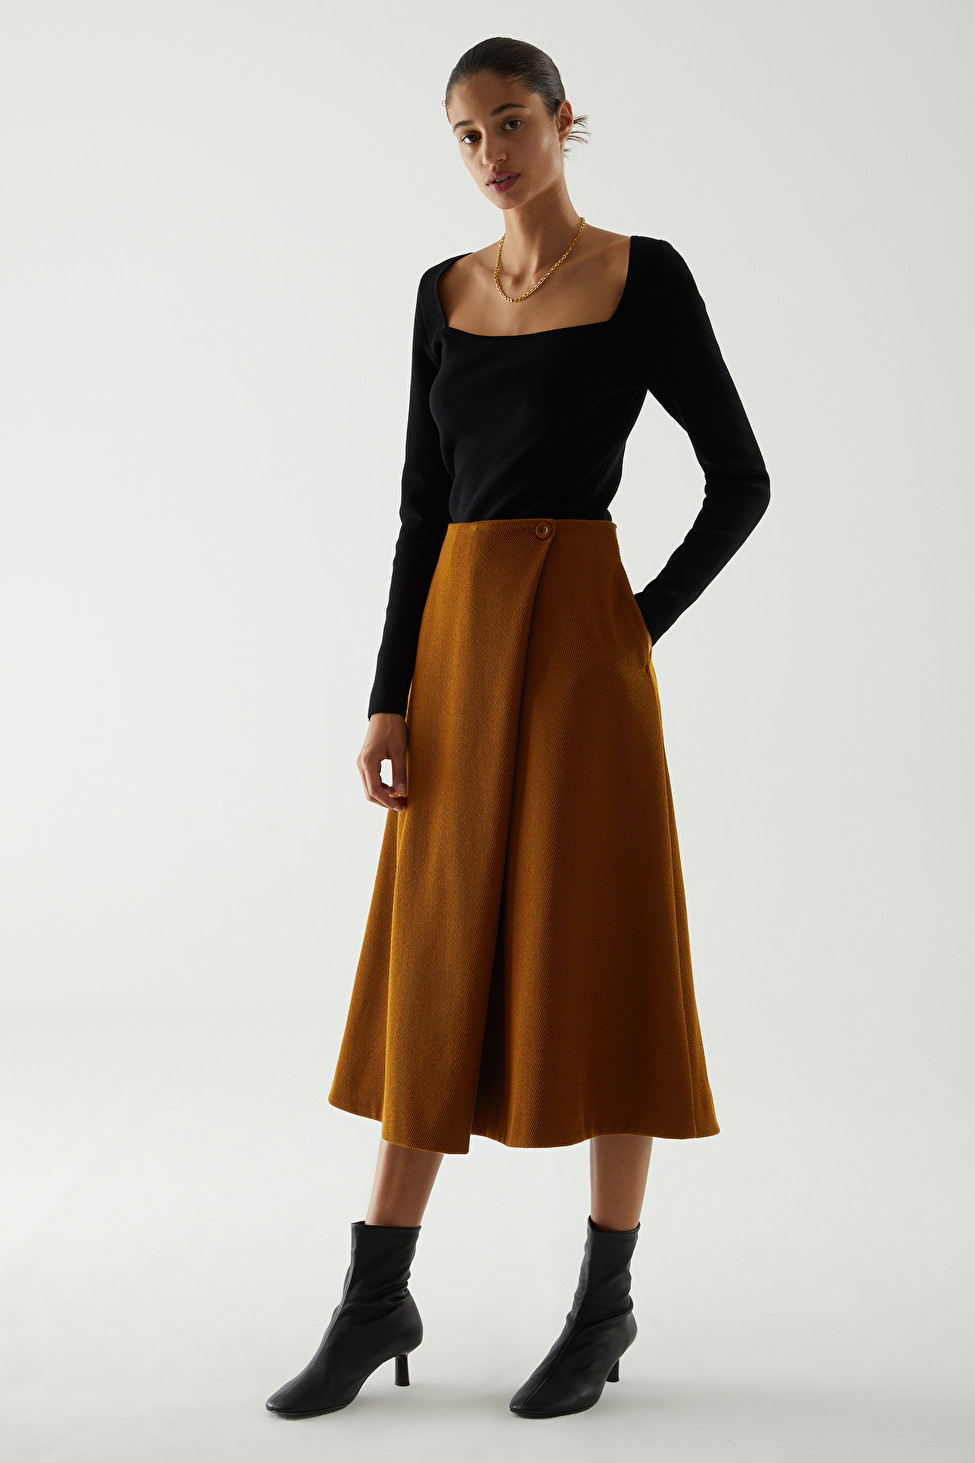 Wrap Skirts Are Trending—These 18 Are Our Favorites | Who What Wear